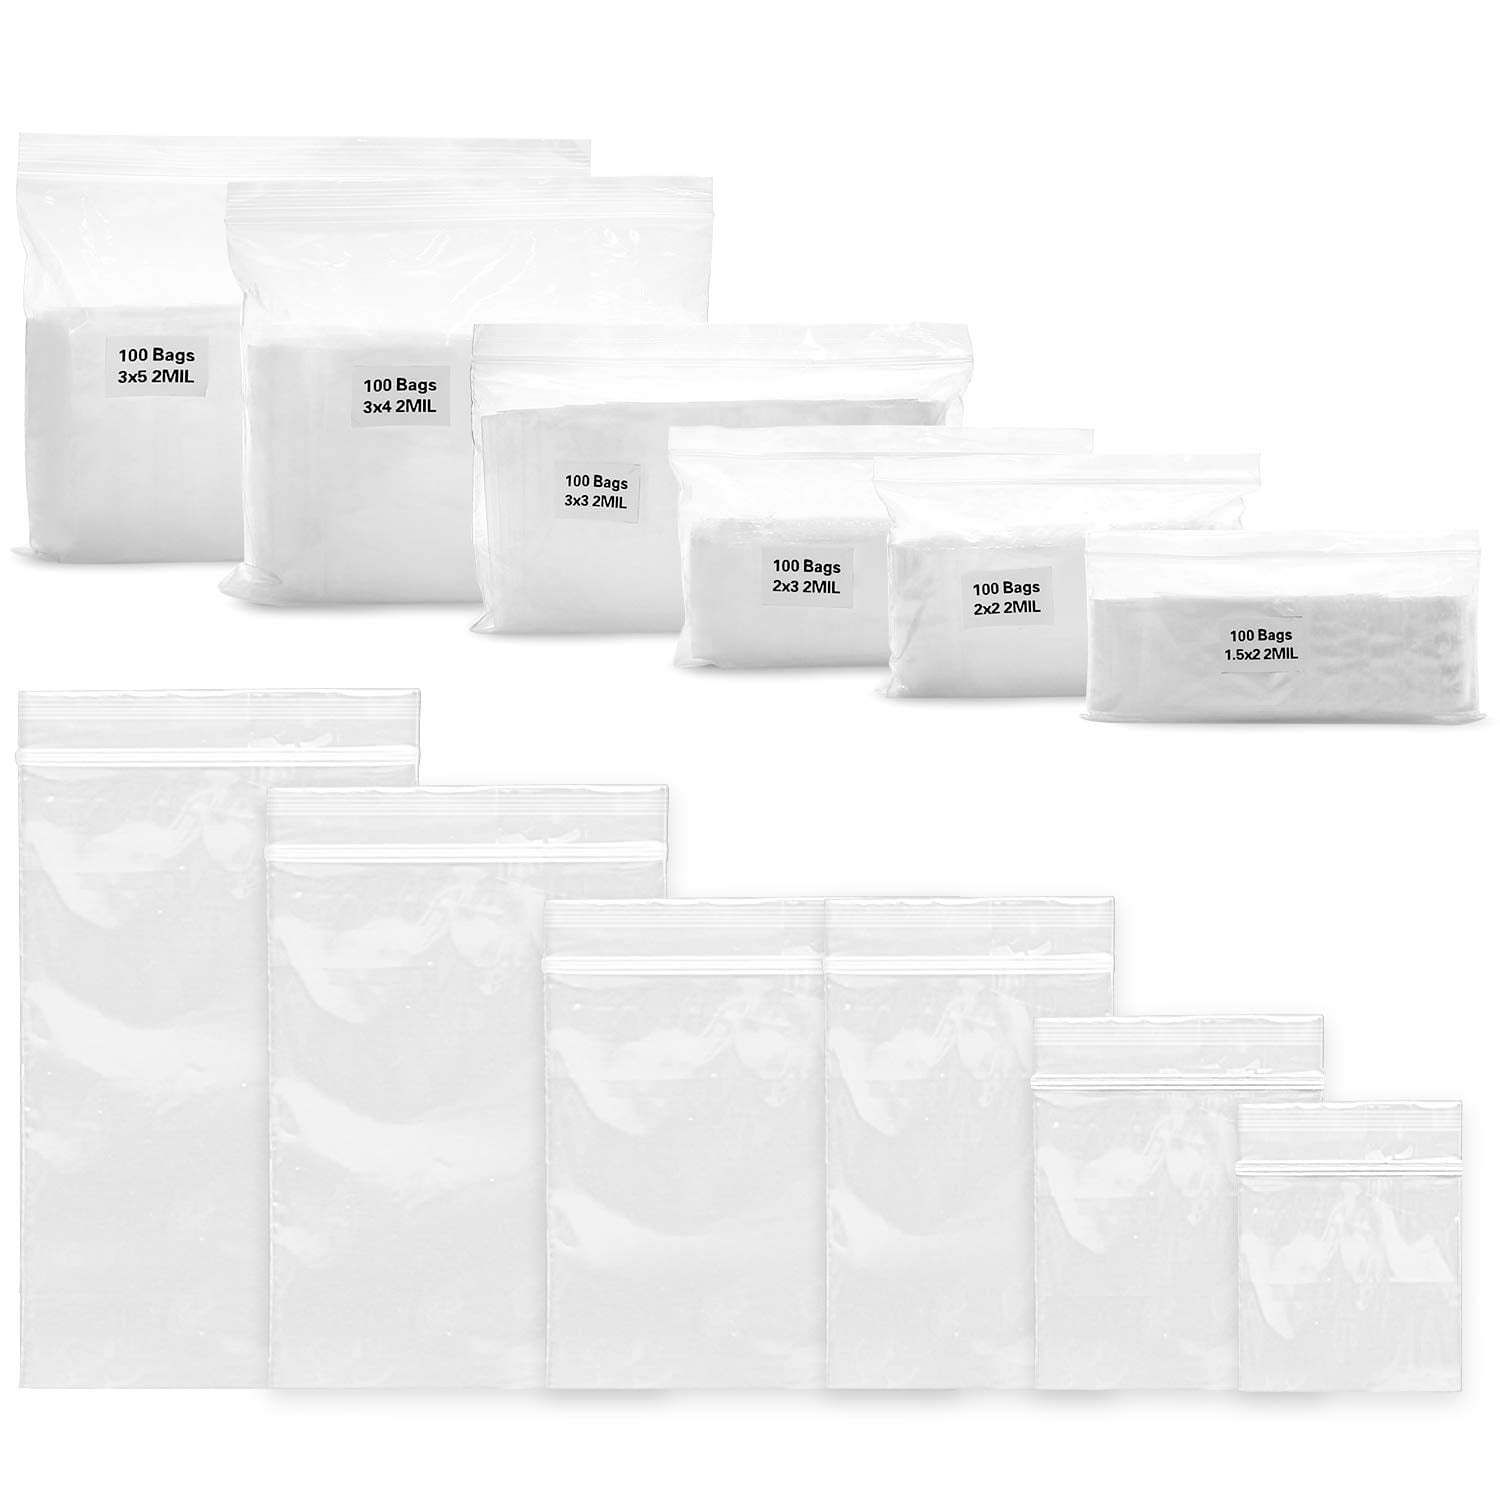  100pcs 10x13 small treat plastic sealed bag quart size gift  giving packaging small plastic magazine protectors for collectors plastic  zip food zipper : Home & Kitchen